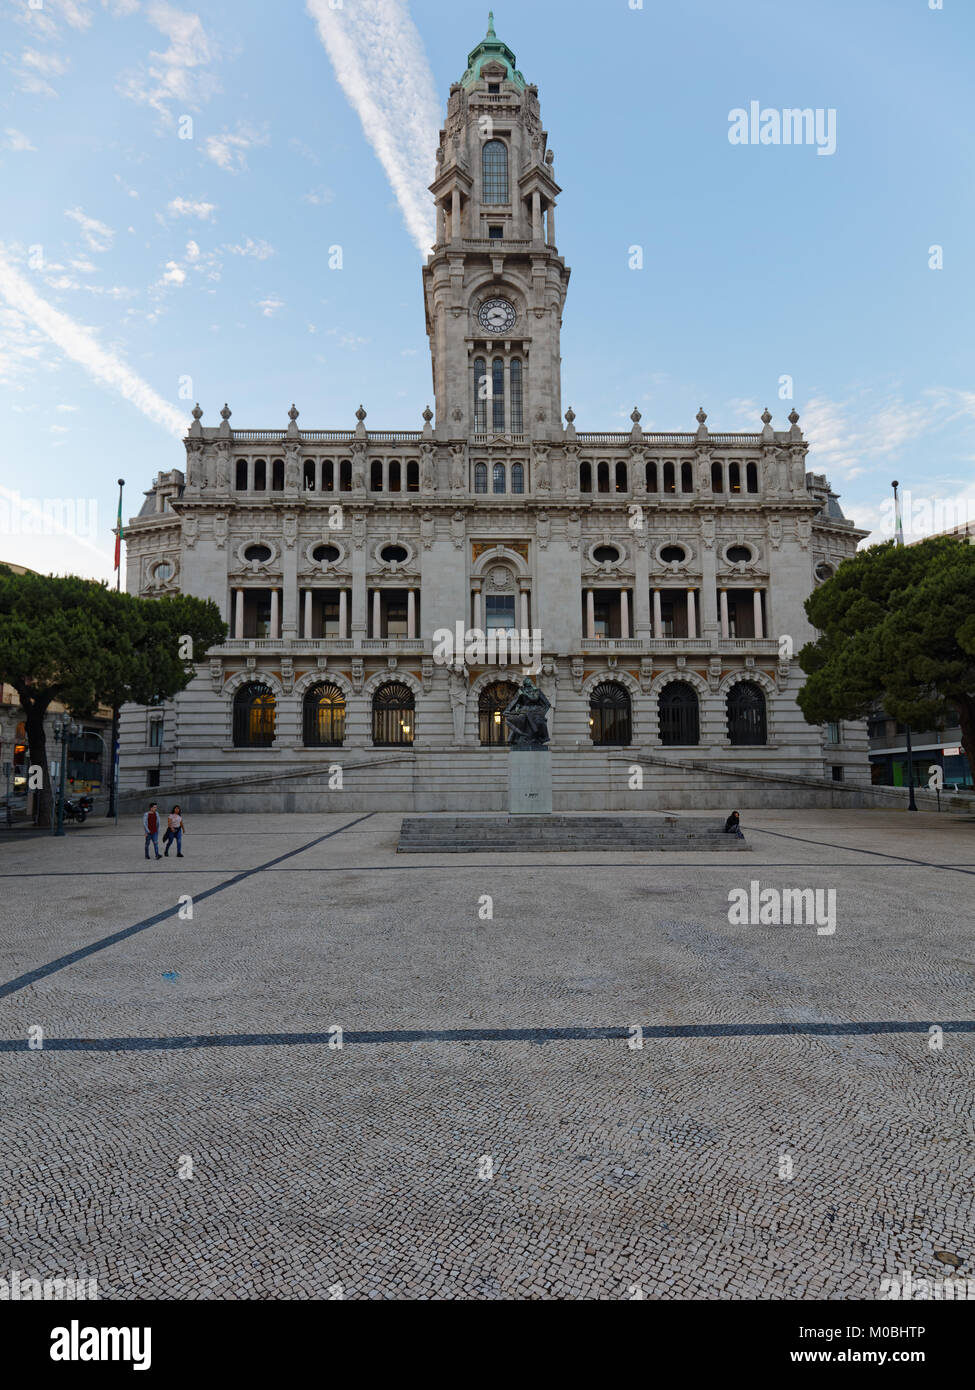 Porto, Portugal - May 8, 2017: People in front of City Hall on Avenida dos Aliados. Built  at the beginning of the 20th century. it has the solid 70m  Stock Photo